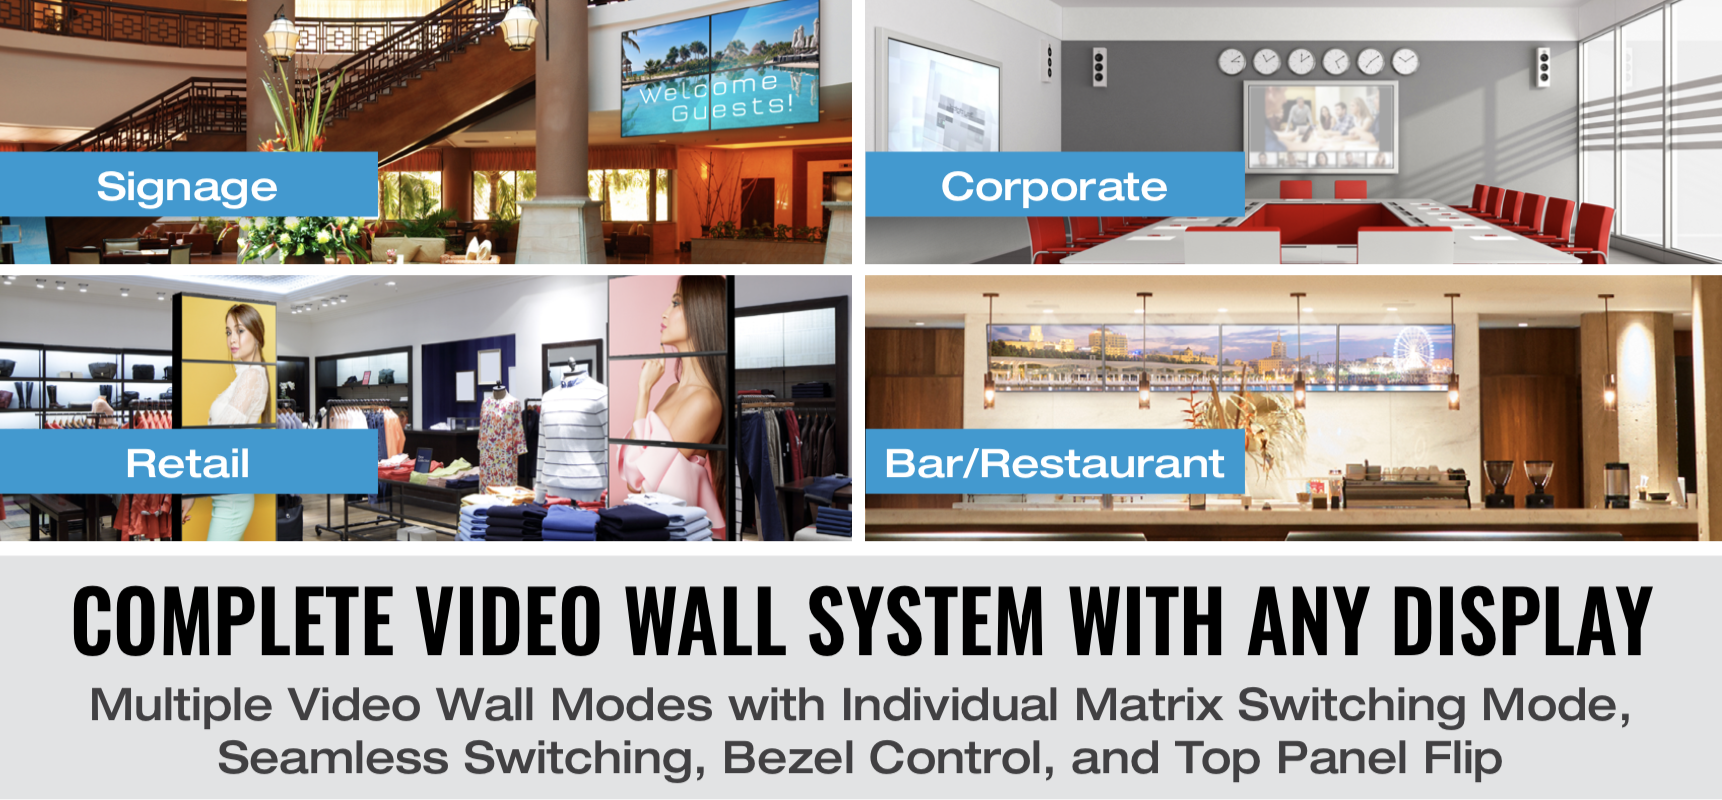 Complete Video Wall System Using Any Displays. Multiple Video Wall Modes with Individual Matrix Switching Mode, Seamless Switching, Bezel Control, and Top Panel Flip